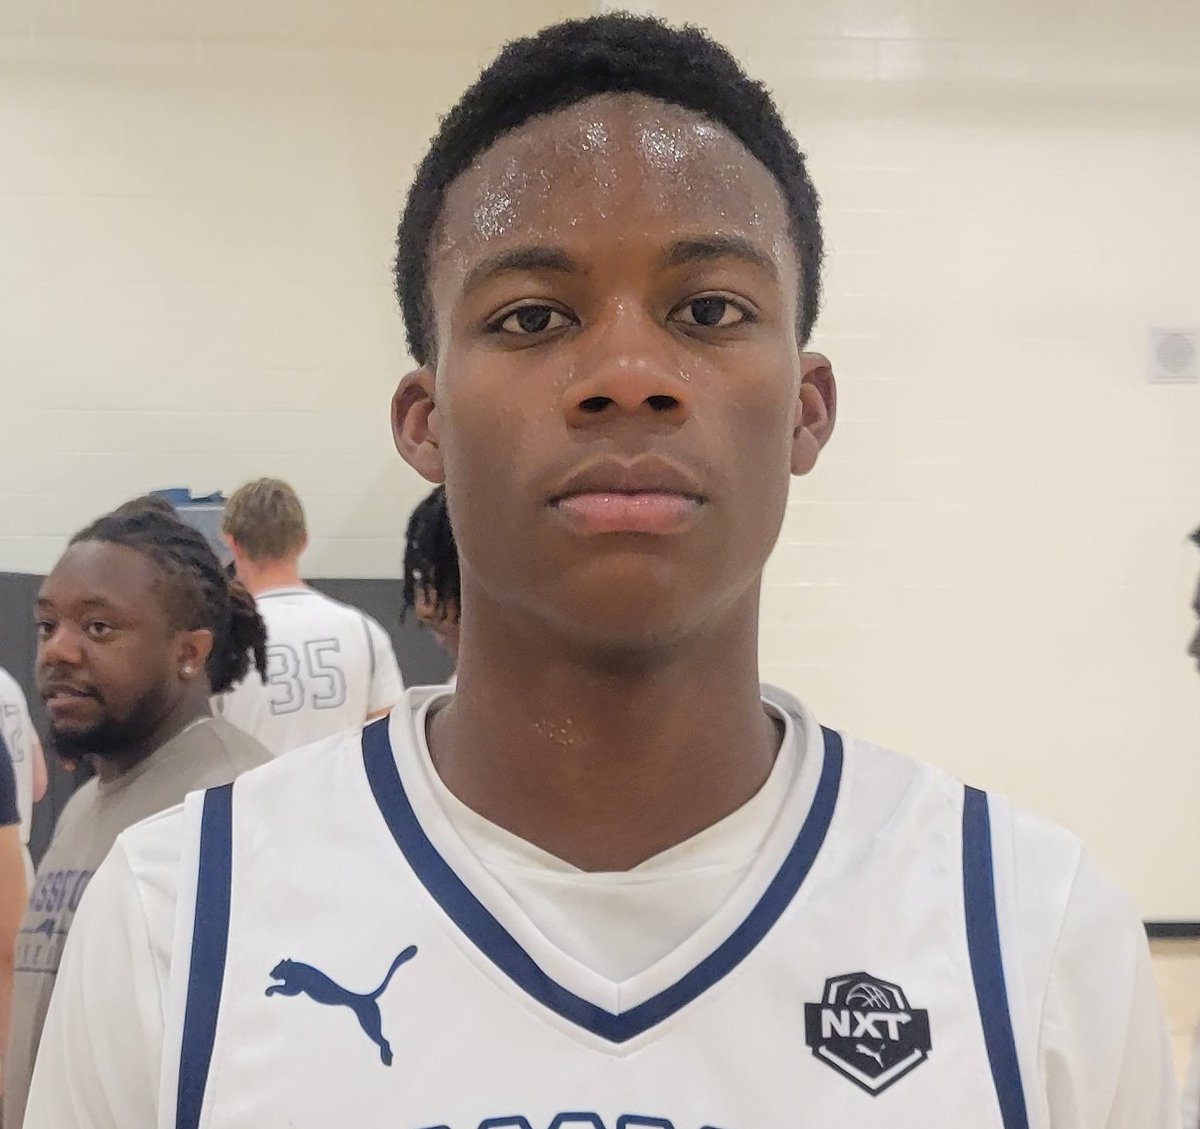 '26 Josiah Currie of Grassroots NC is a bouncy guard who plays bigger than his size. He plays within the flow of the offense but will pick his spots for when to attack. 📌 @josiah_currie @JHillsman writes more: ontheradarhoops.com/otr-hoops-swee…